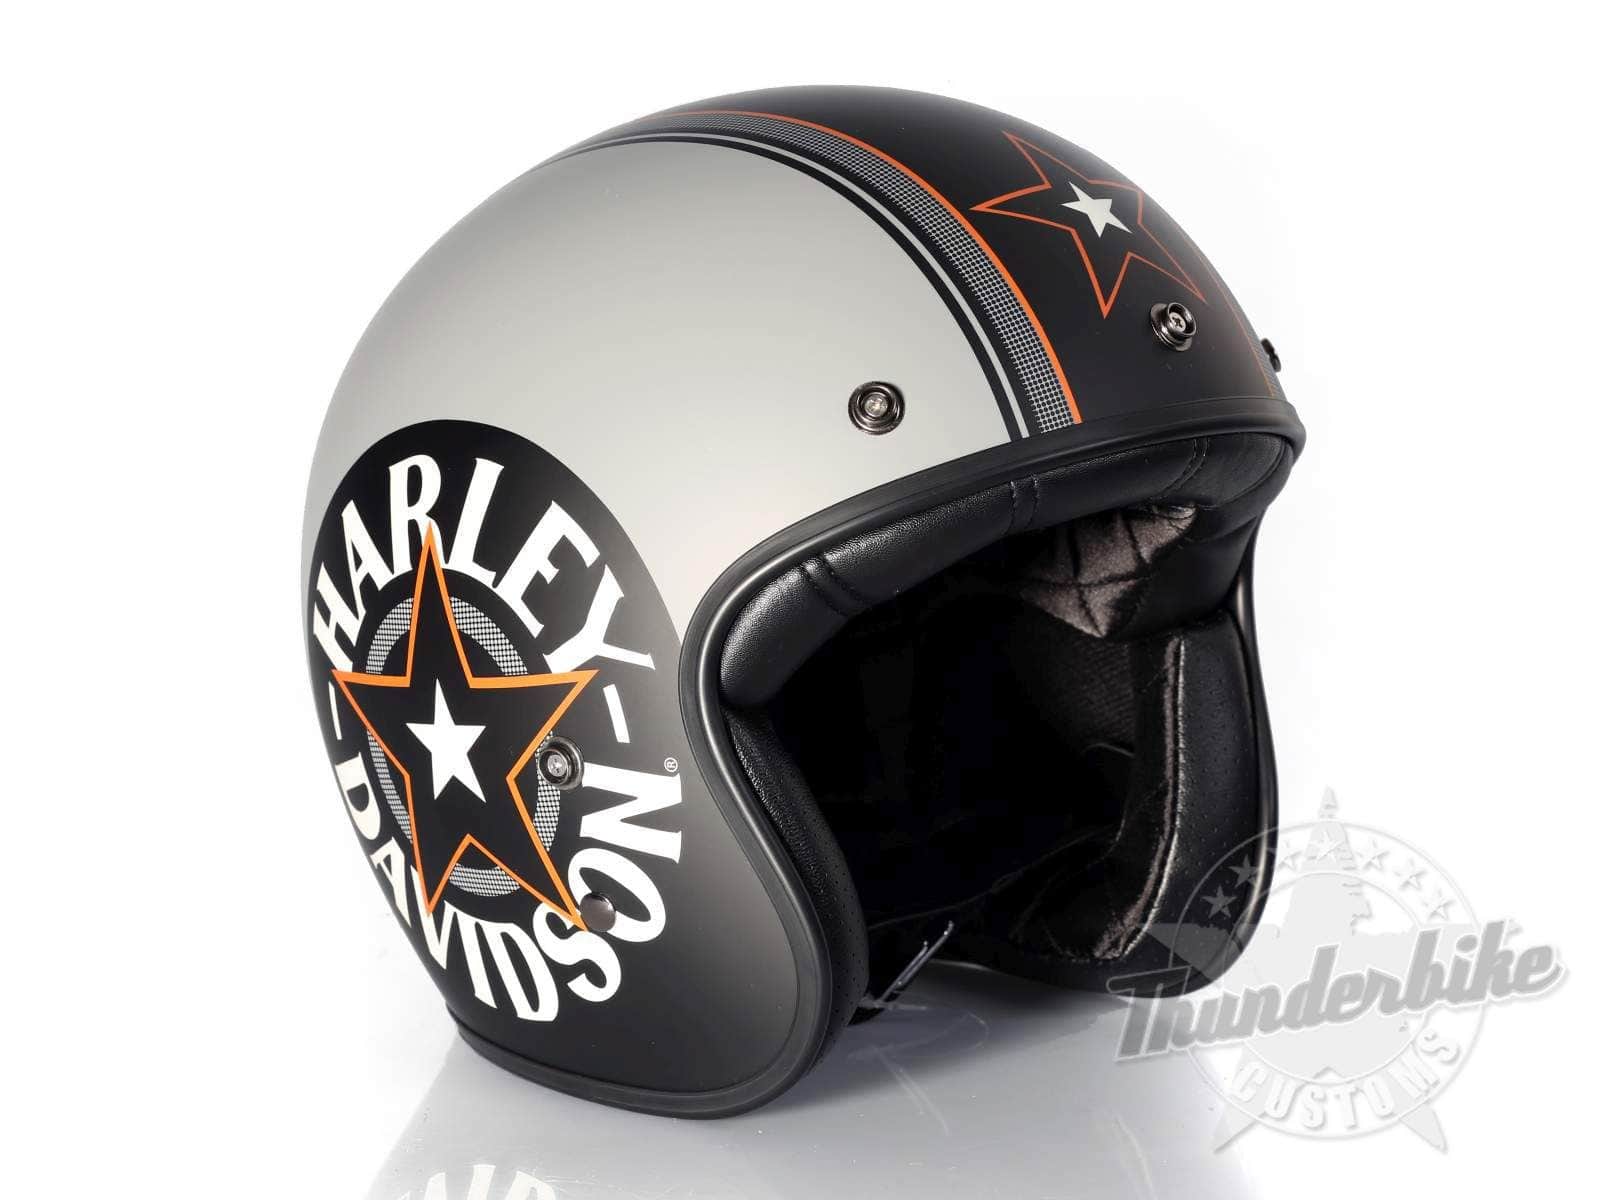 What kind of helmet and we riding with? - Page 12 - Harley Davidson Forums